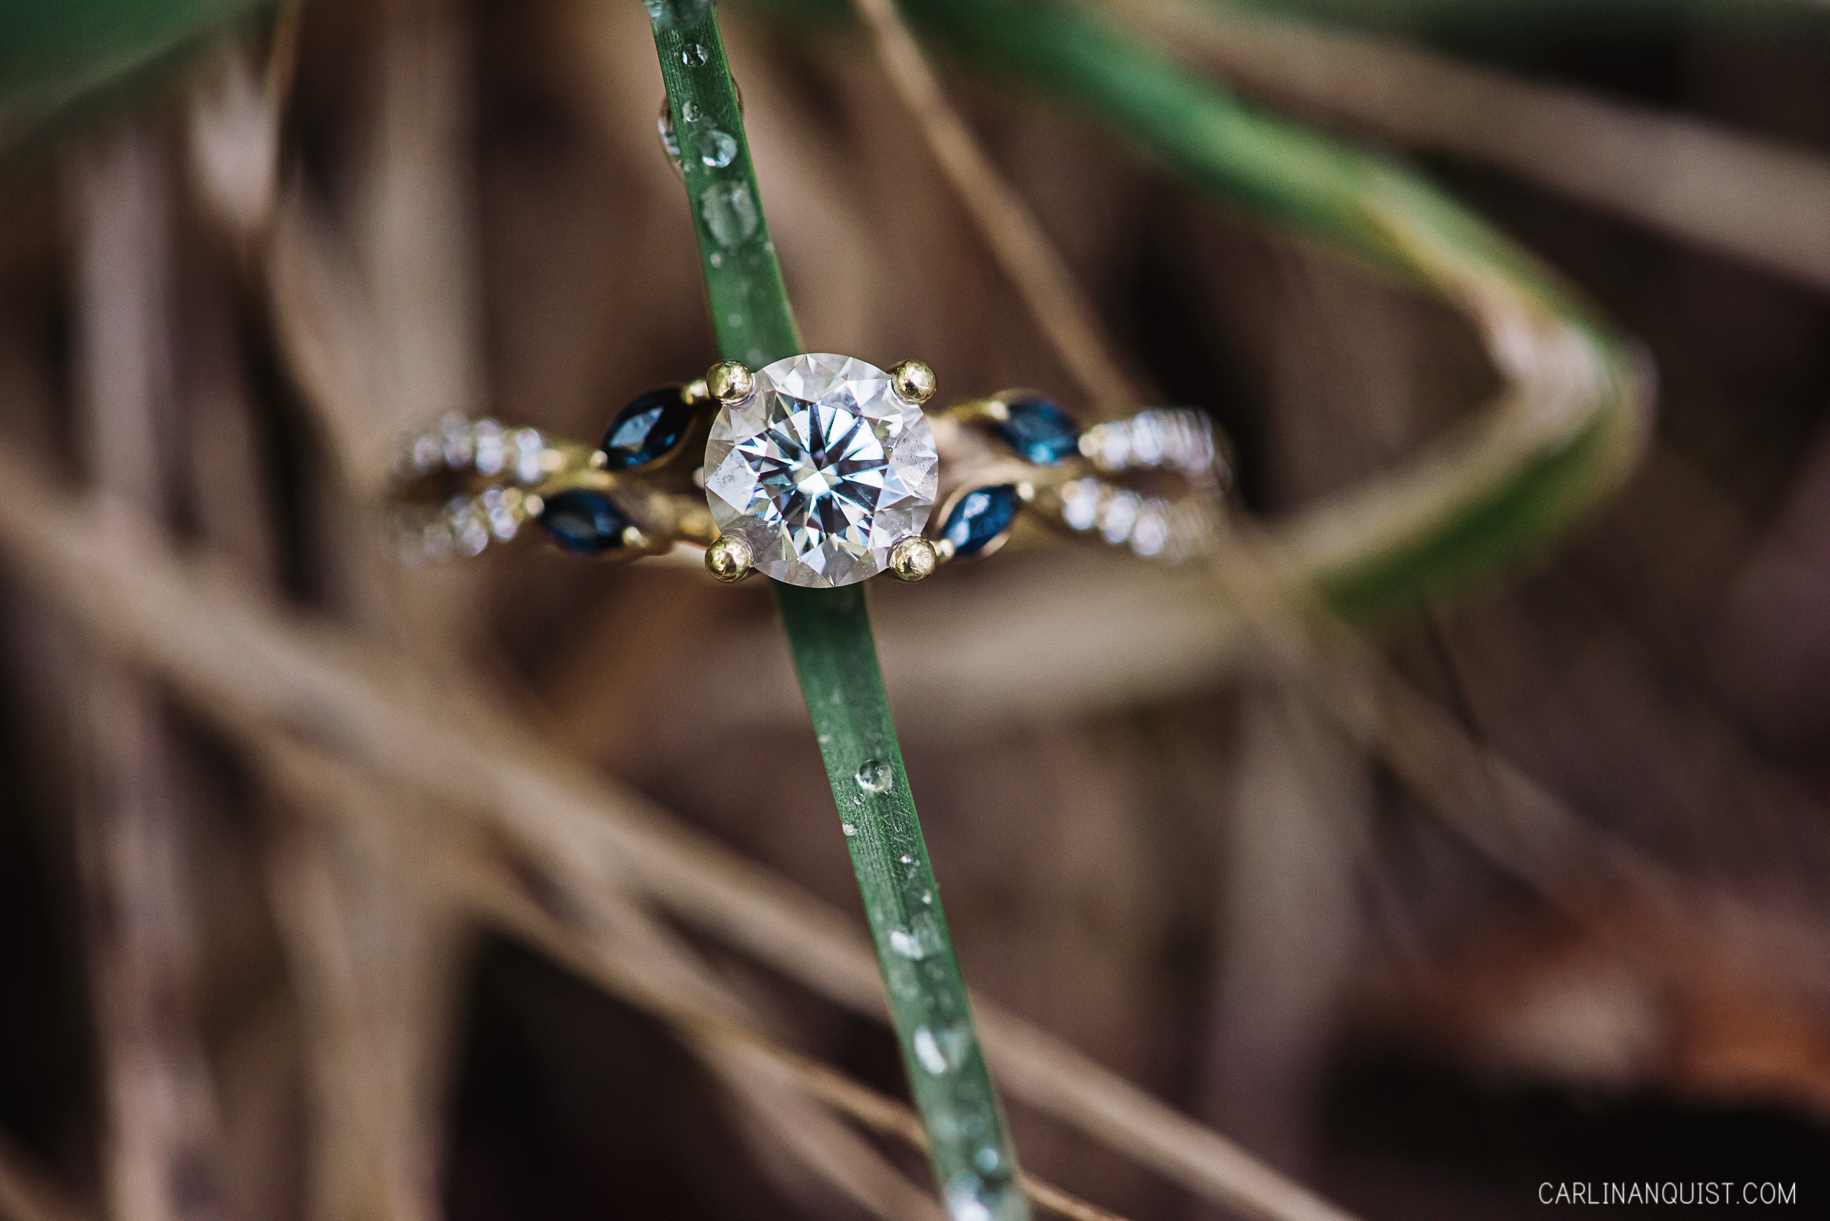 Elbow Falls Engagement Photos | Braided Engagement Ring